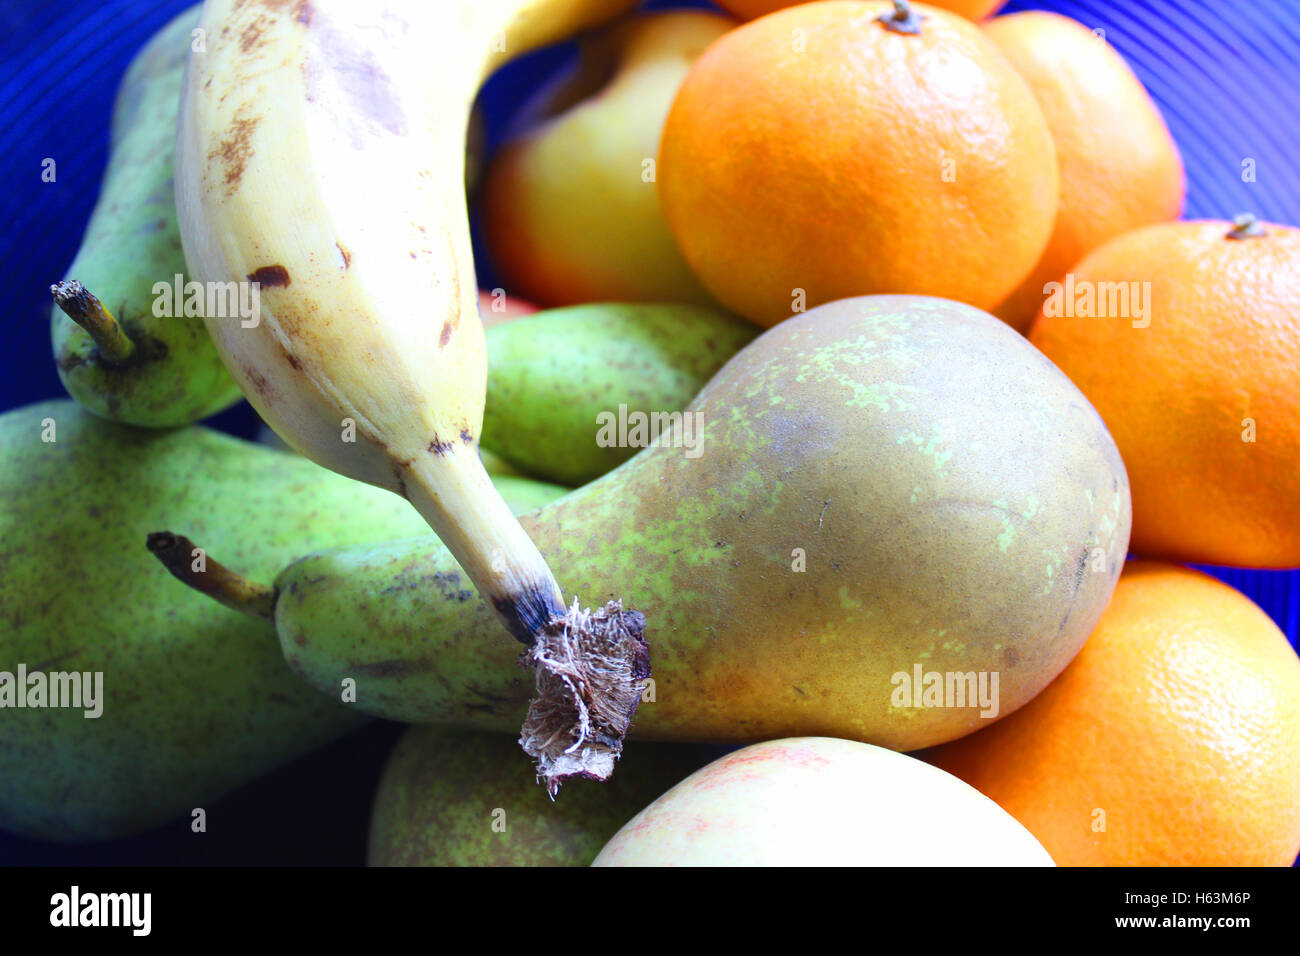 A bowl with fruits Stock Photo